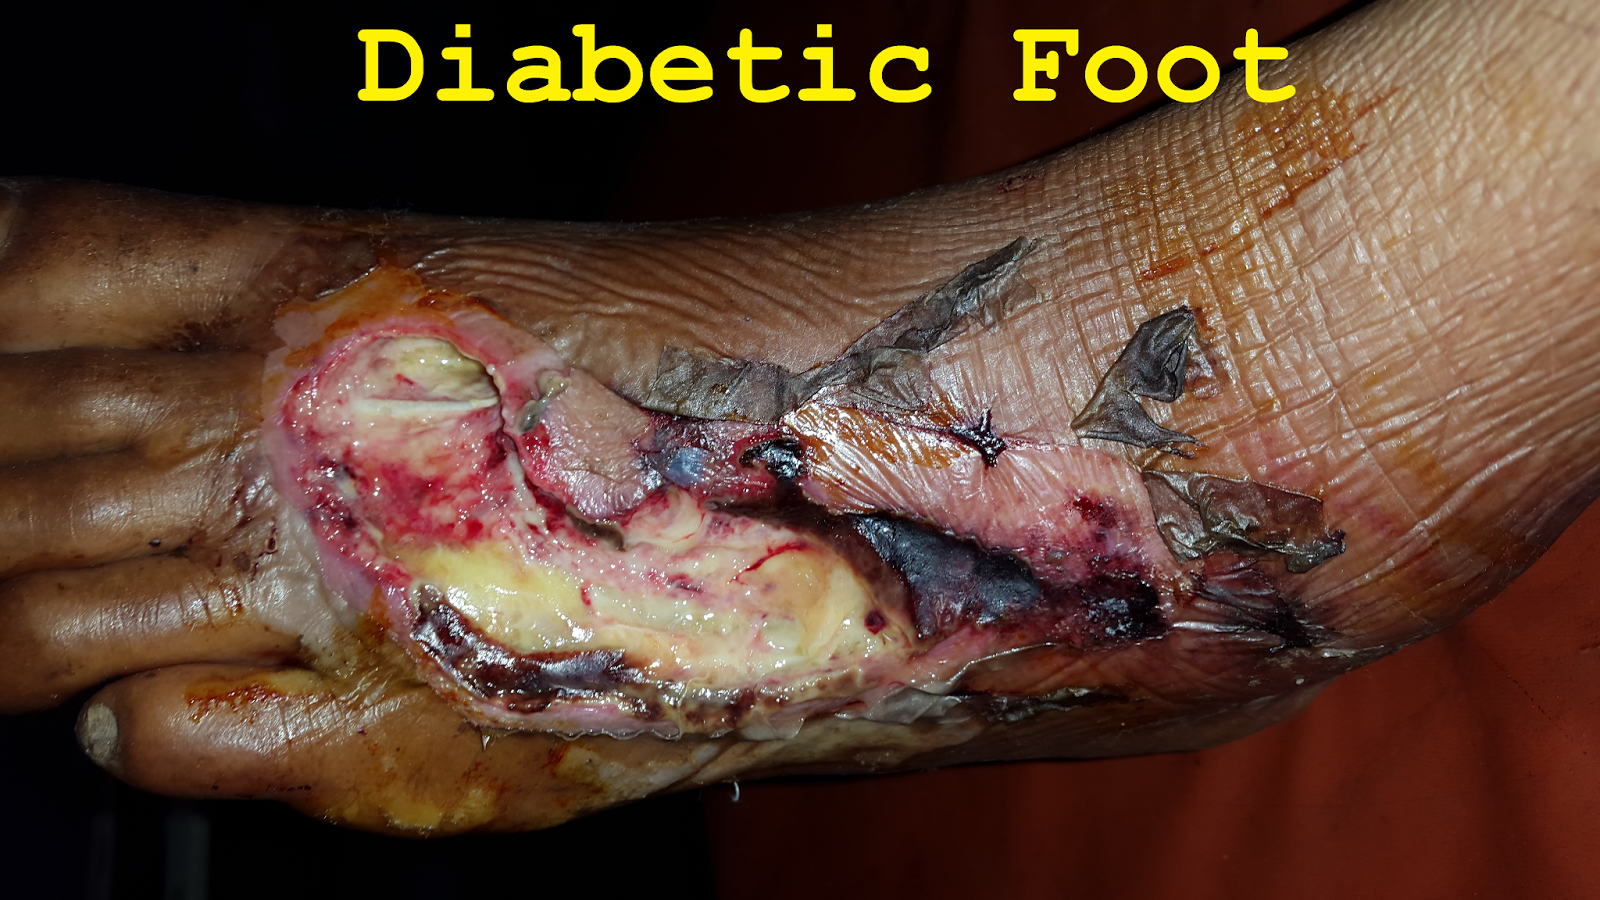 Diabetic Foot Infection: A Major and Dangerous Complication of Diabetes